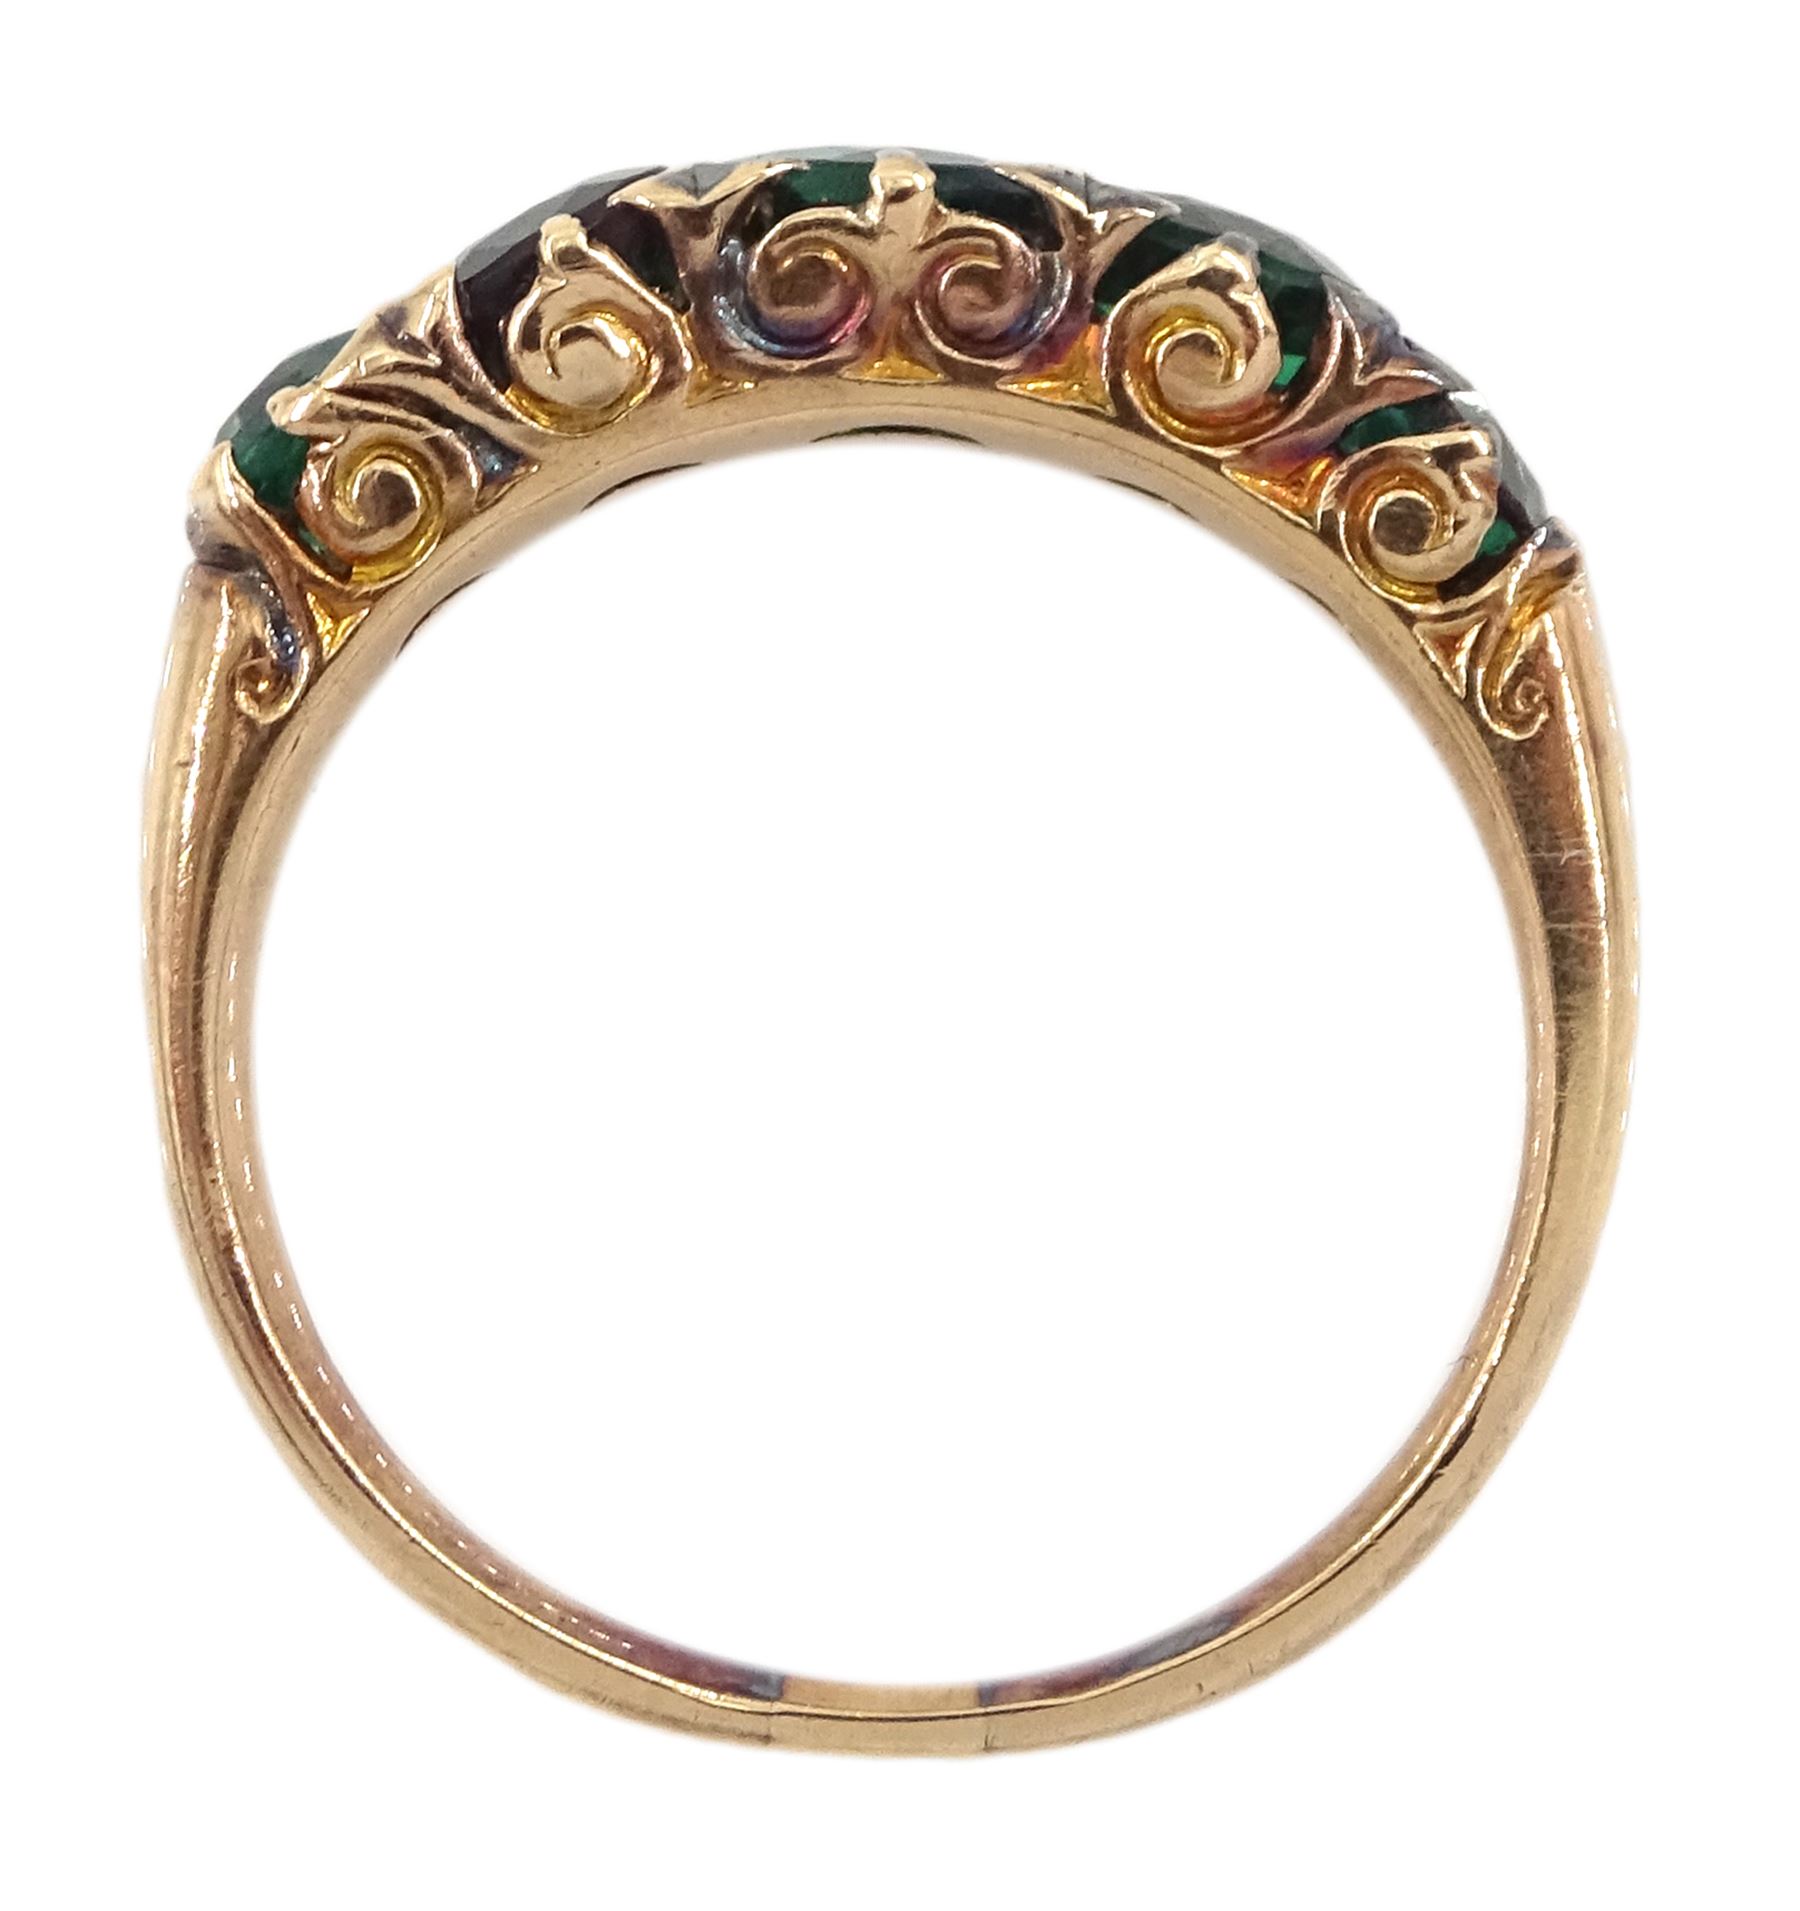 Early-mid 20th century gold graduating green paste stone ring - Image 2 of 4